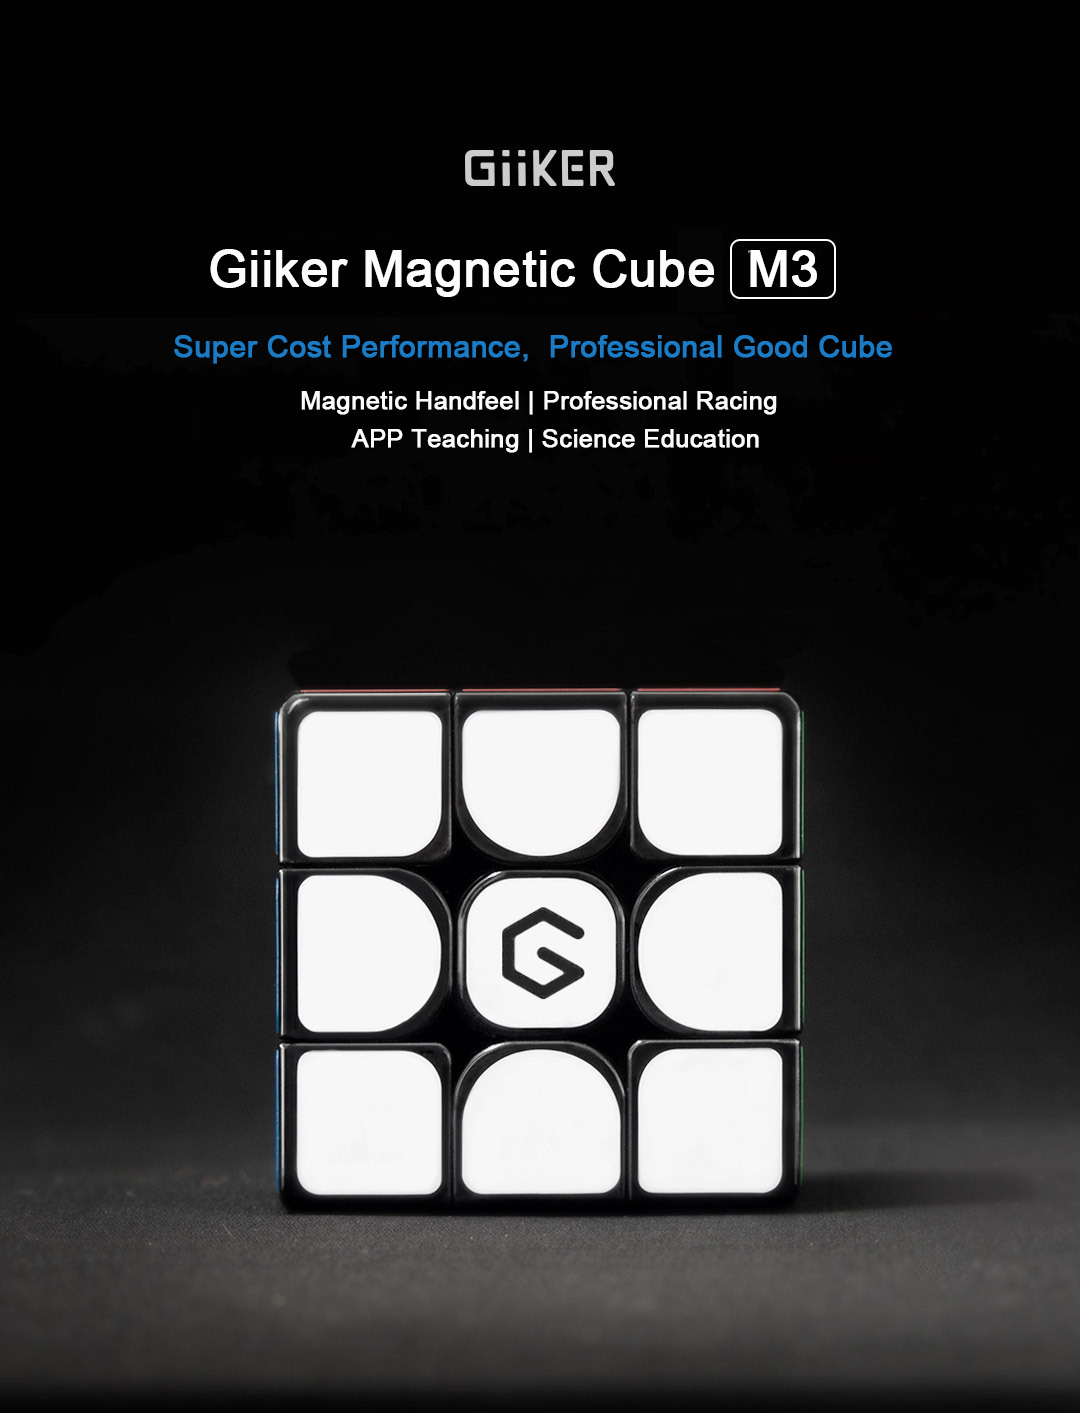 Xiaomi Giiker M3 Magnetic Cube 3x3x3 Vivid Color Square Magic Cube Puzzle Science Education Toy Gift 18